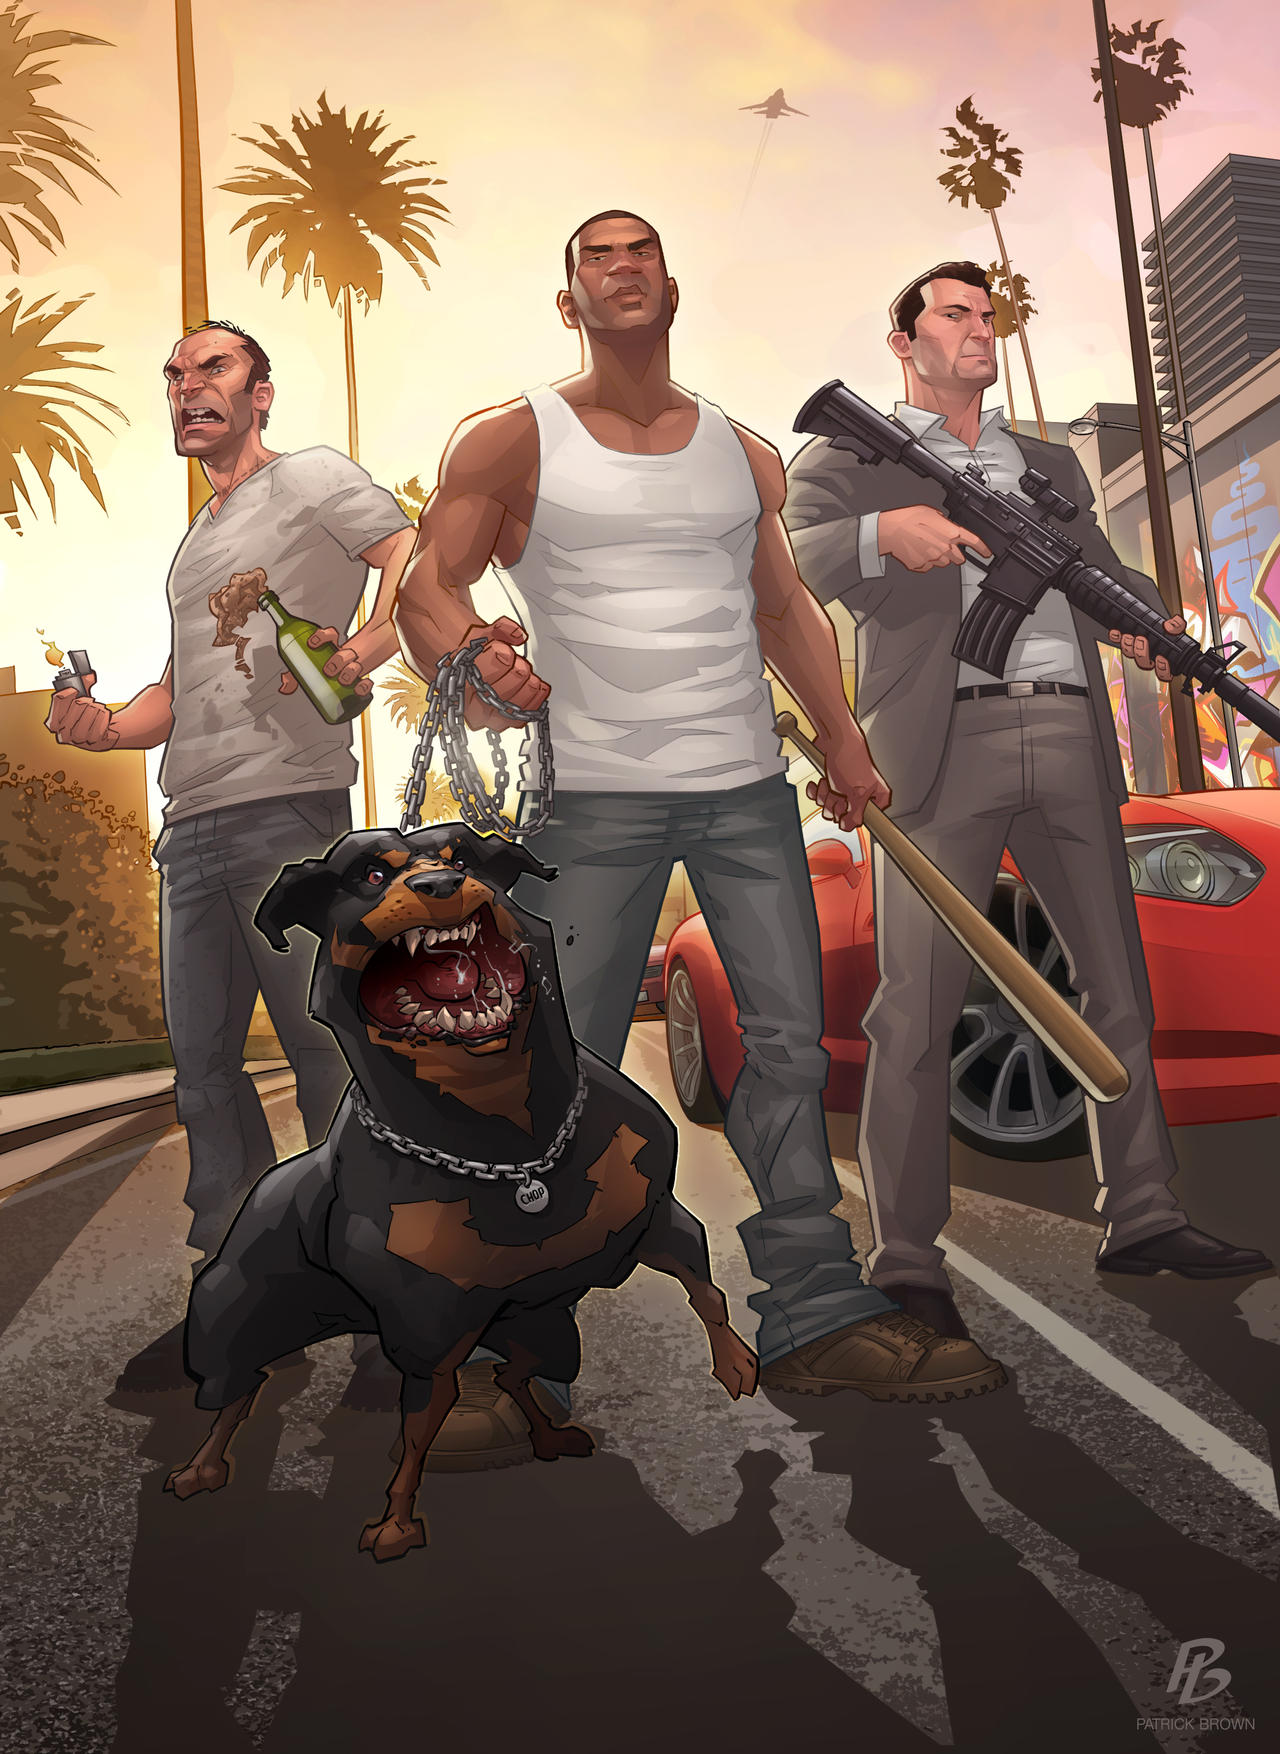 grand_theft_auto_v___the_standoff_by_pat